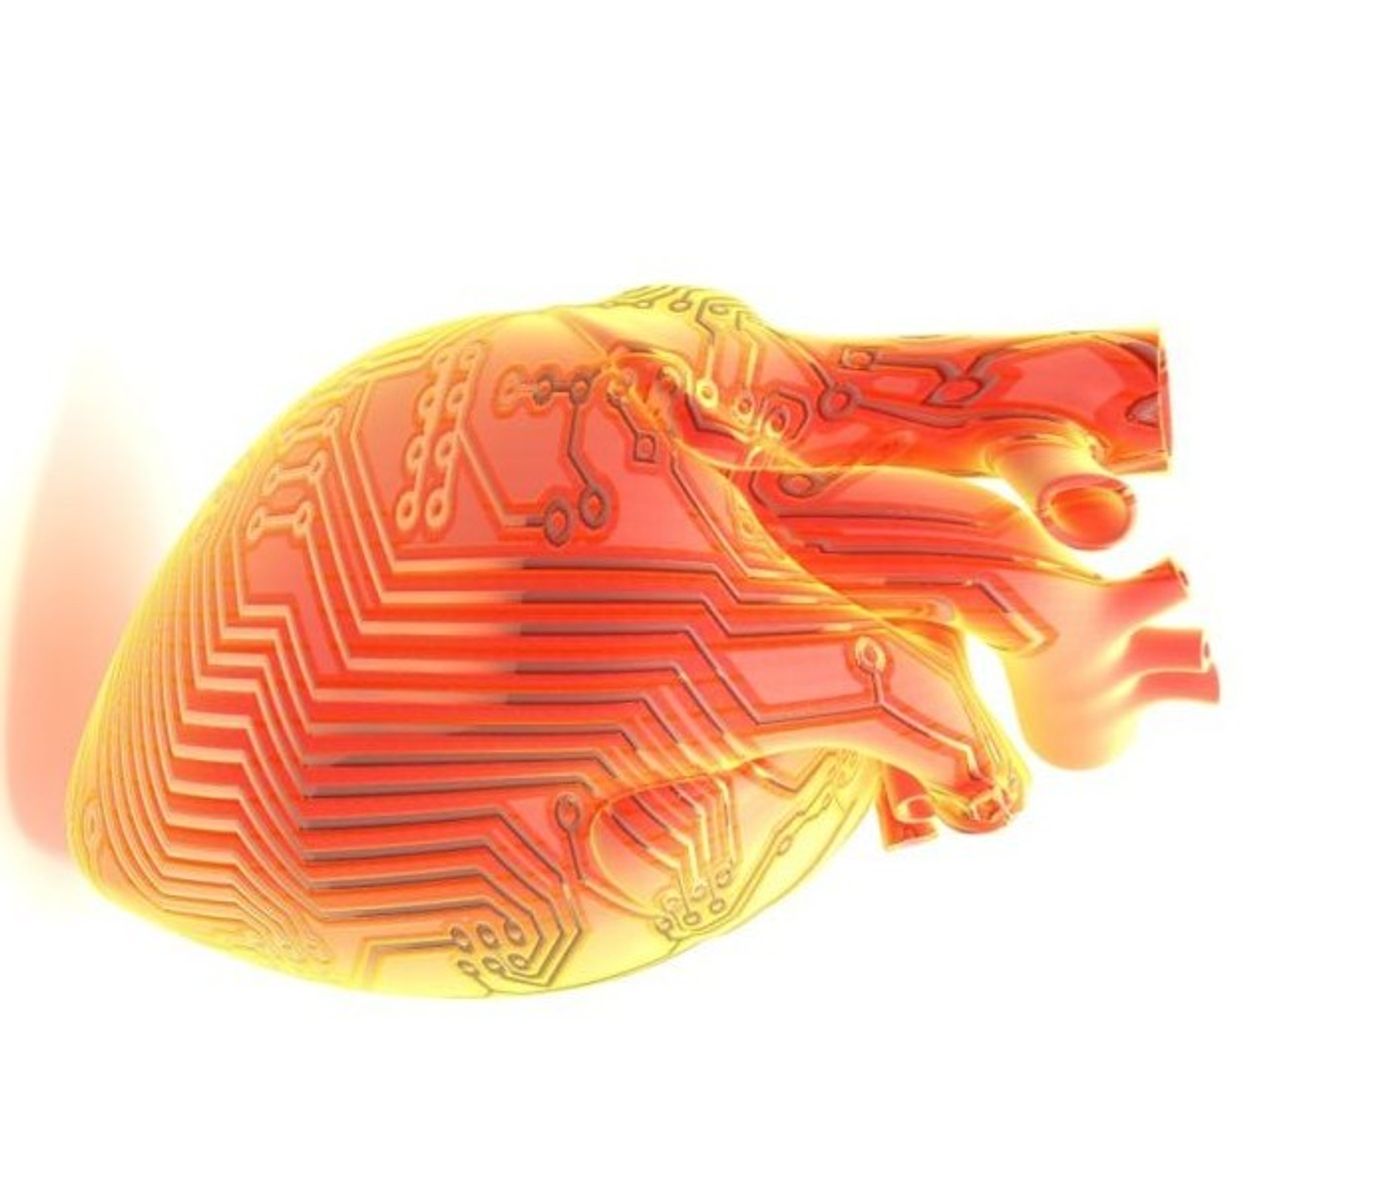 heart patches Archives - Science in the News